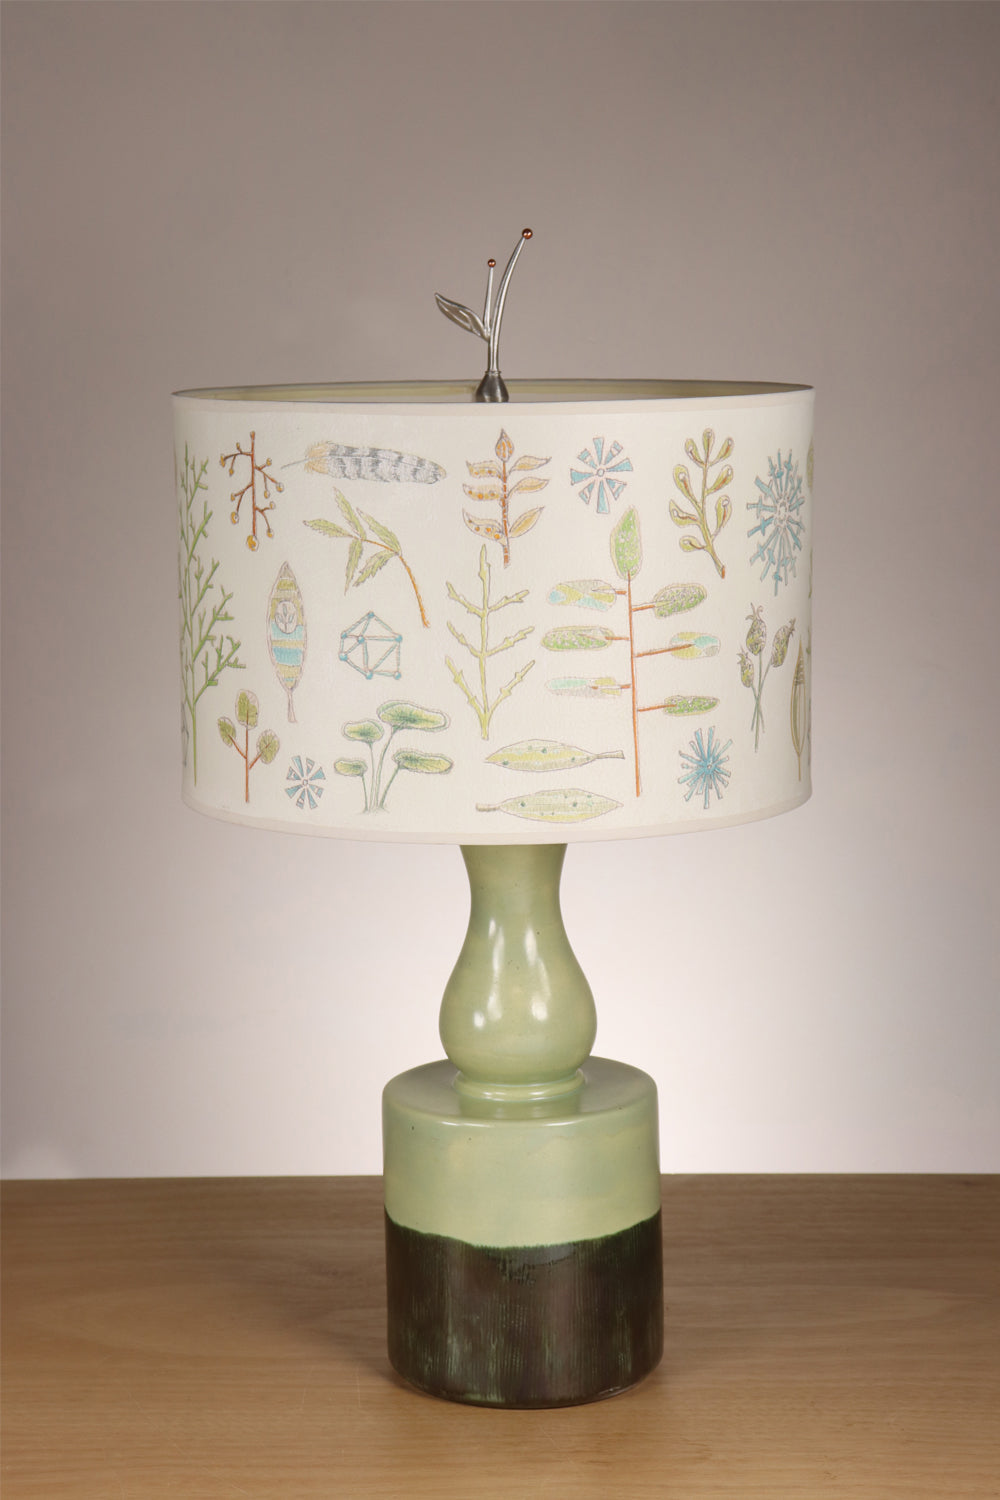 Janna Ugone & Co Table Lamp Ceramic Table Lamp with Large Drum Shade in Field Chart